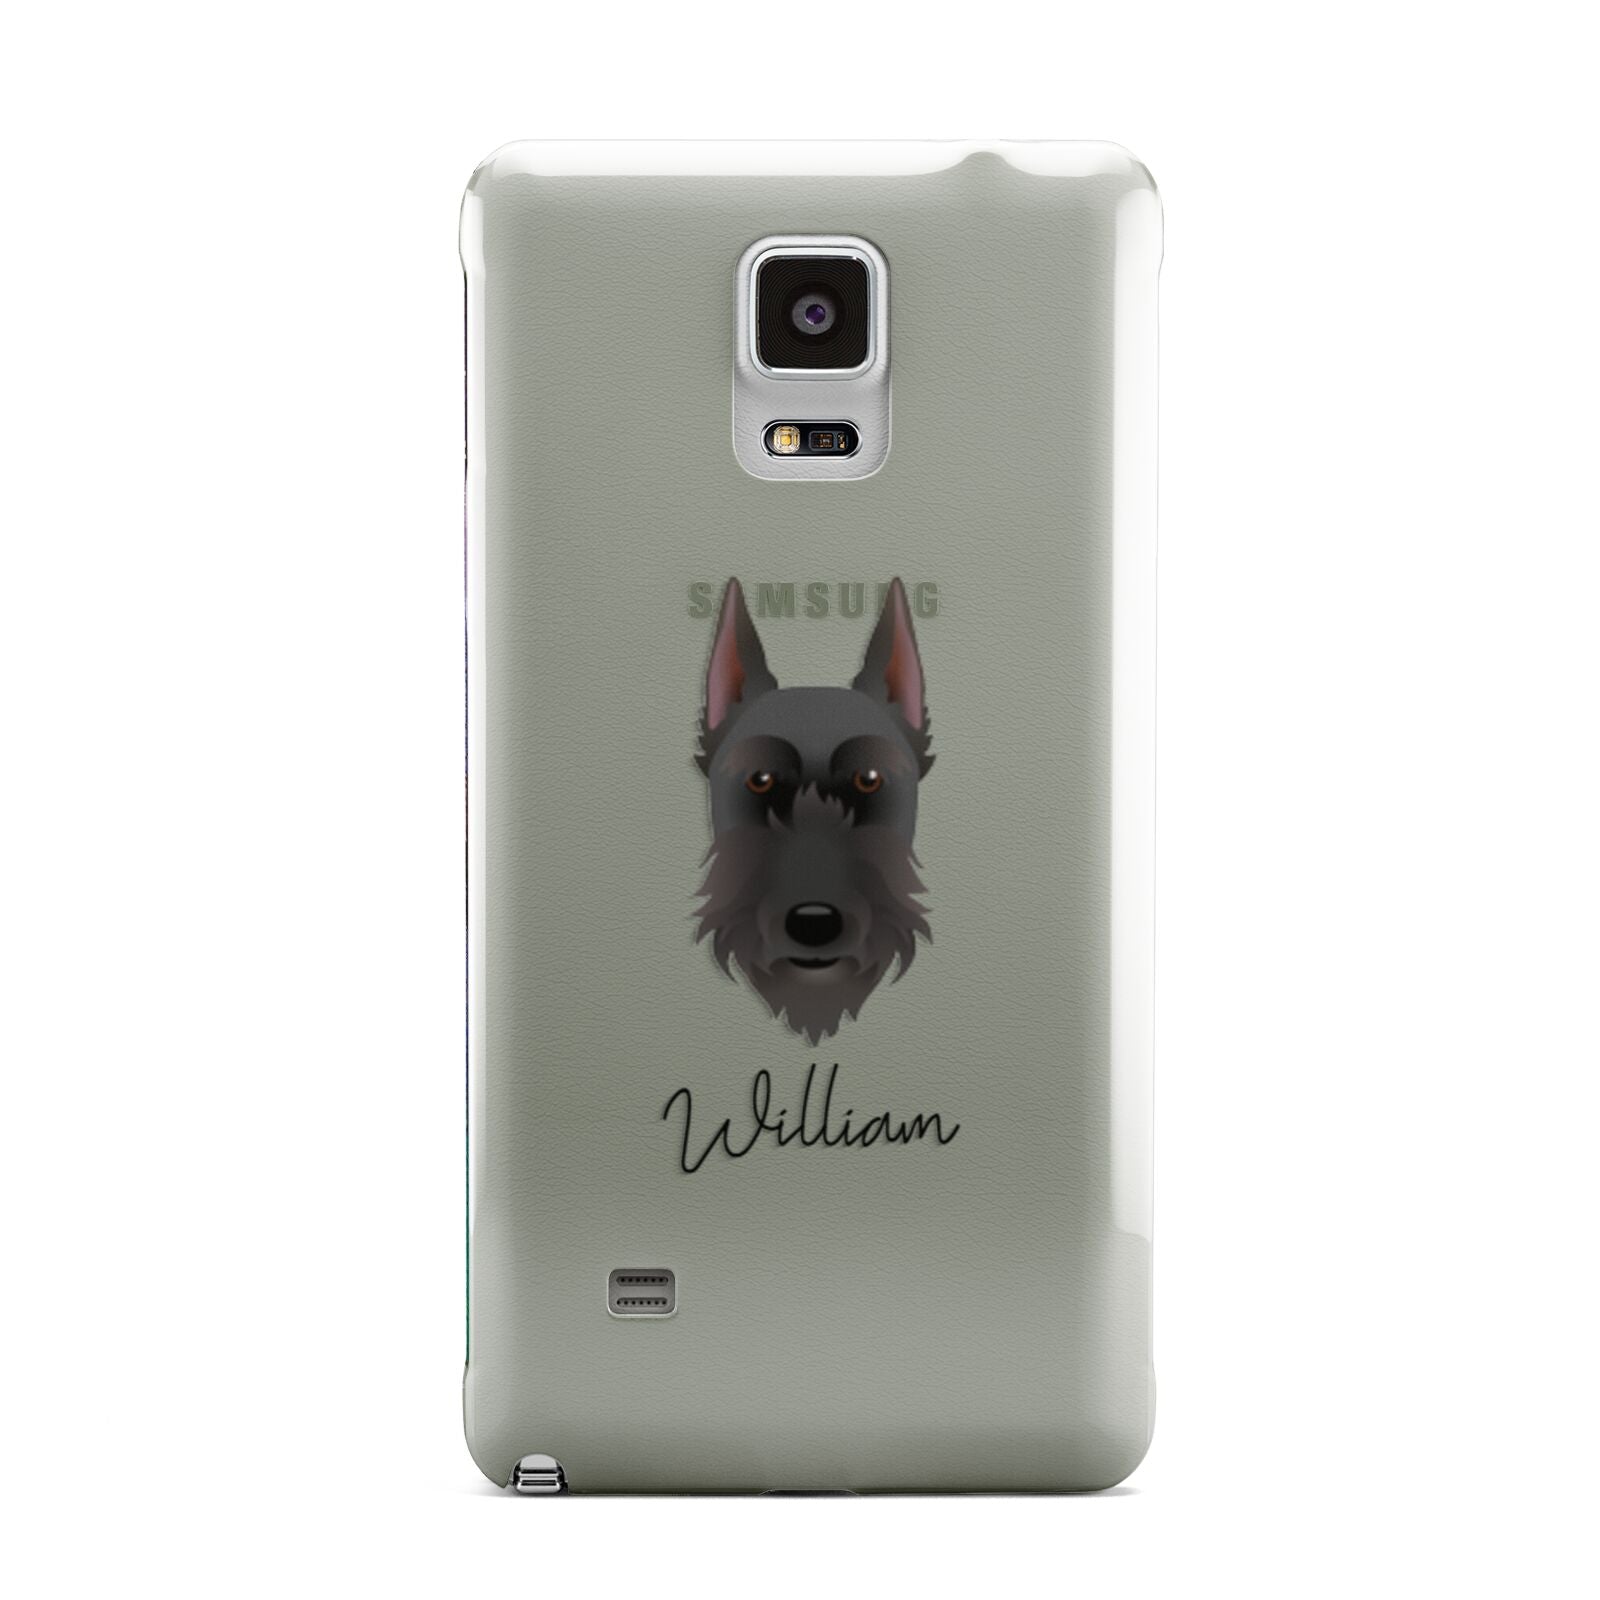 Giant Schnauzer Personalised Samsung Galaxy Note 4 Case